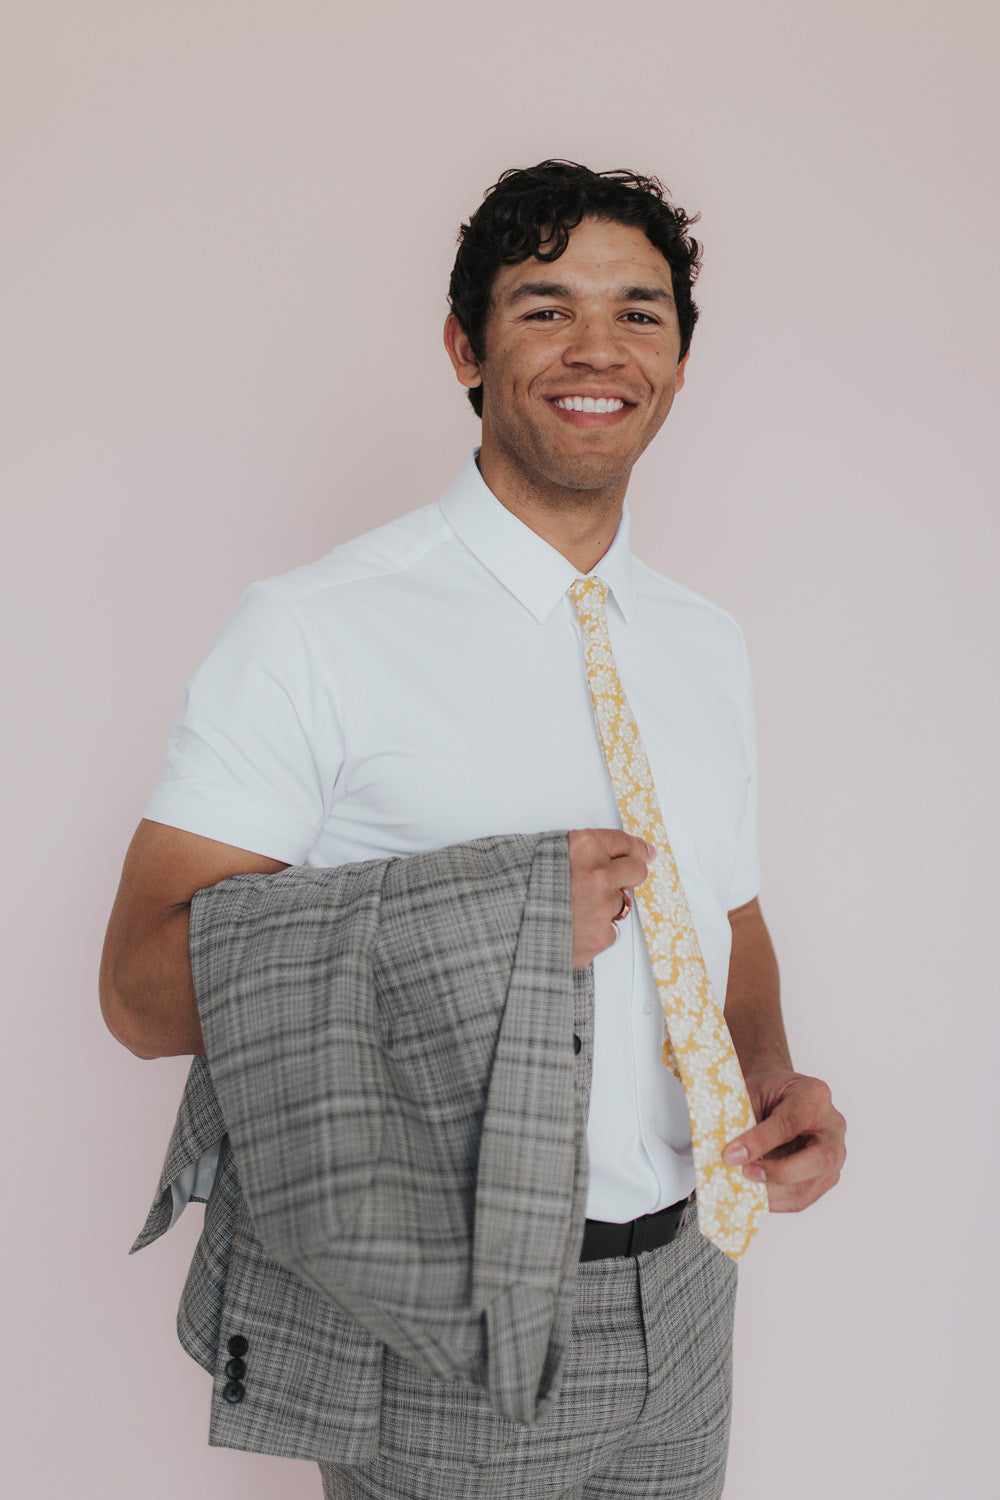 Daisy Tie worn with a white shirt and gray plaid suit.